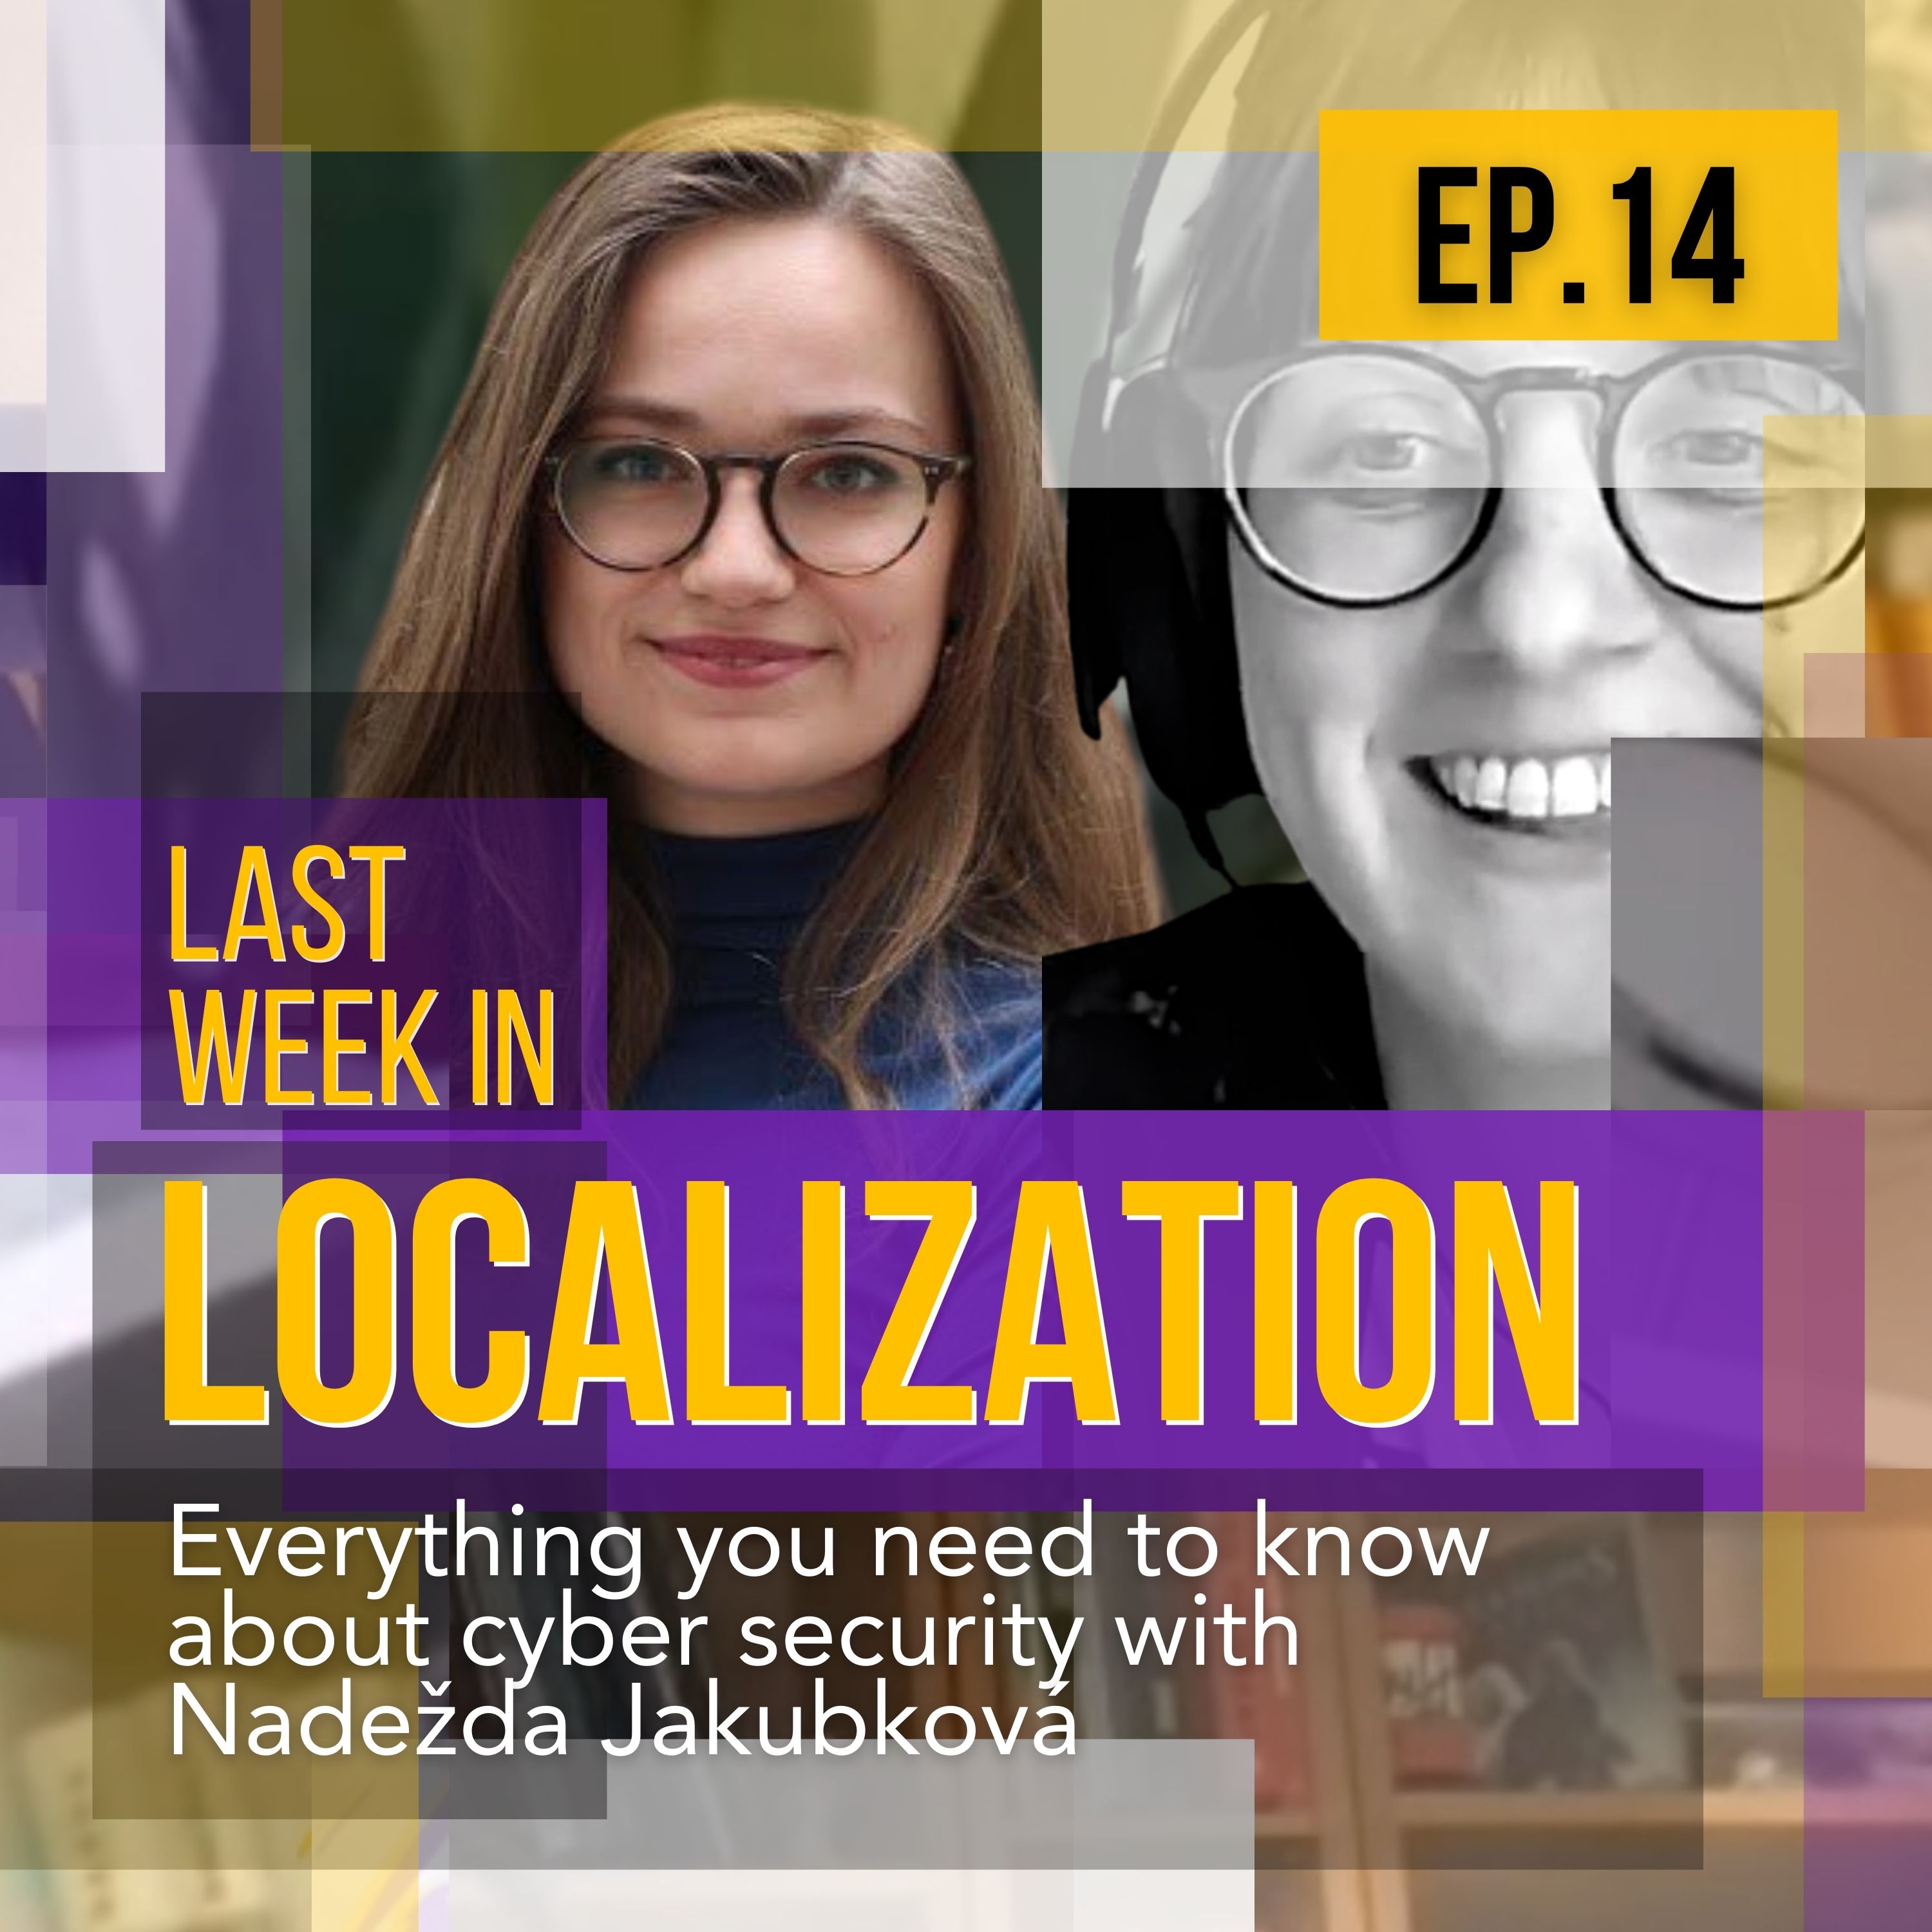 Everything you need to know about cyber security with Nadežda Jakubková